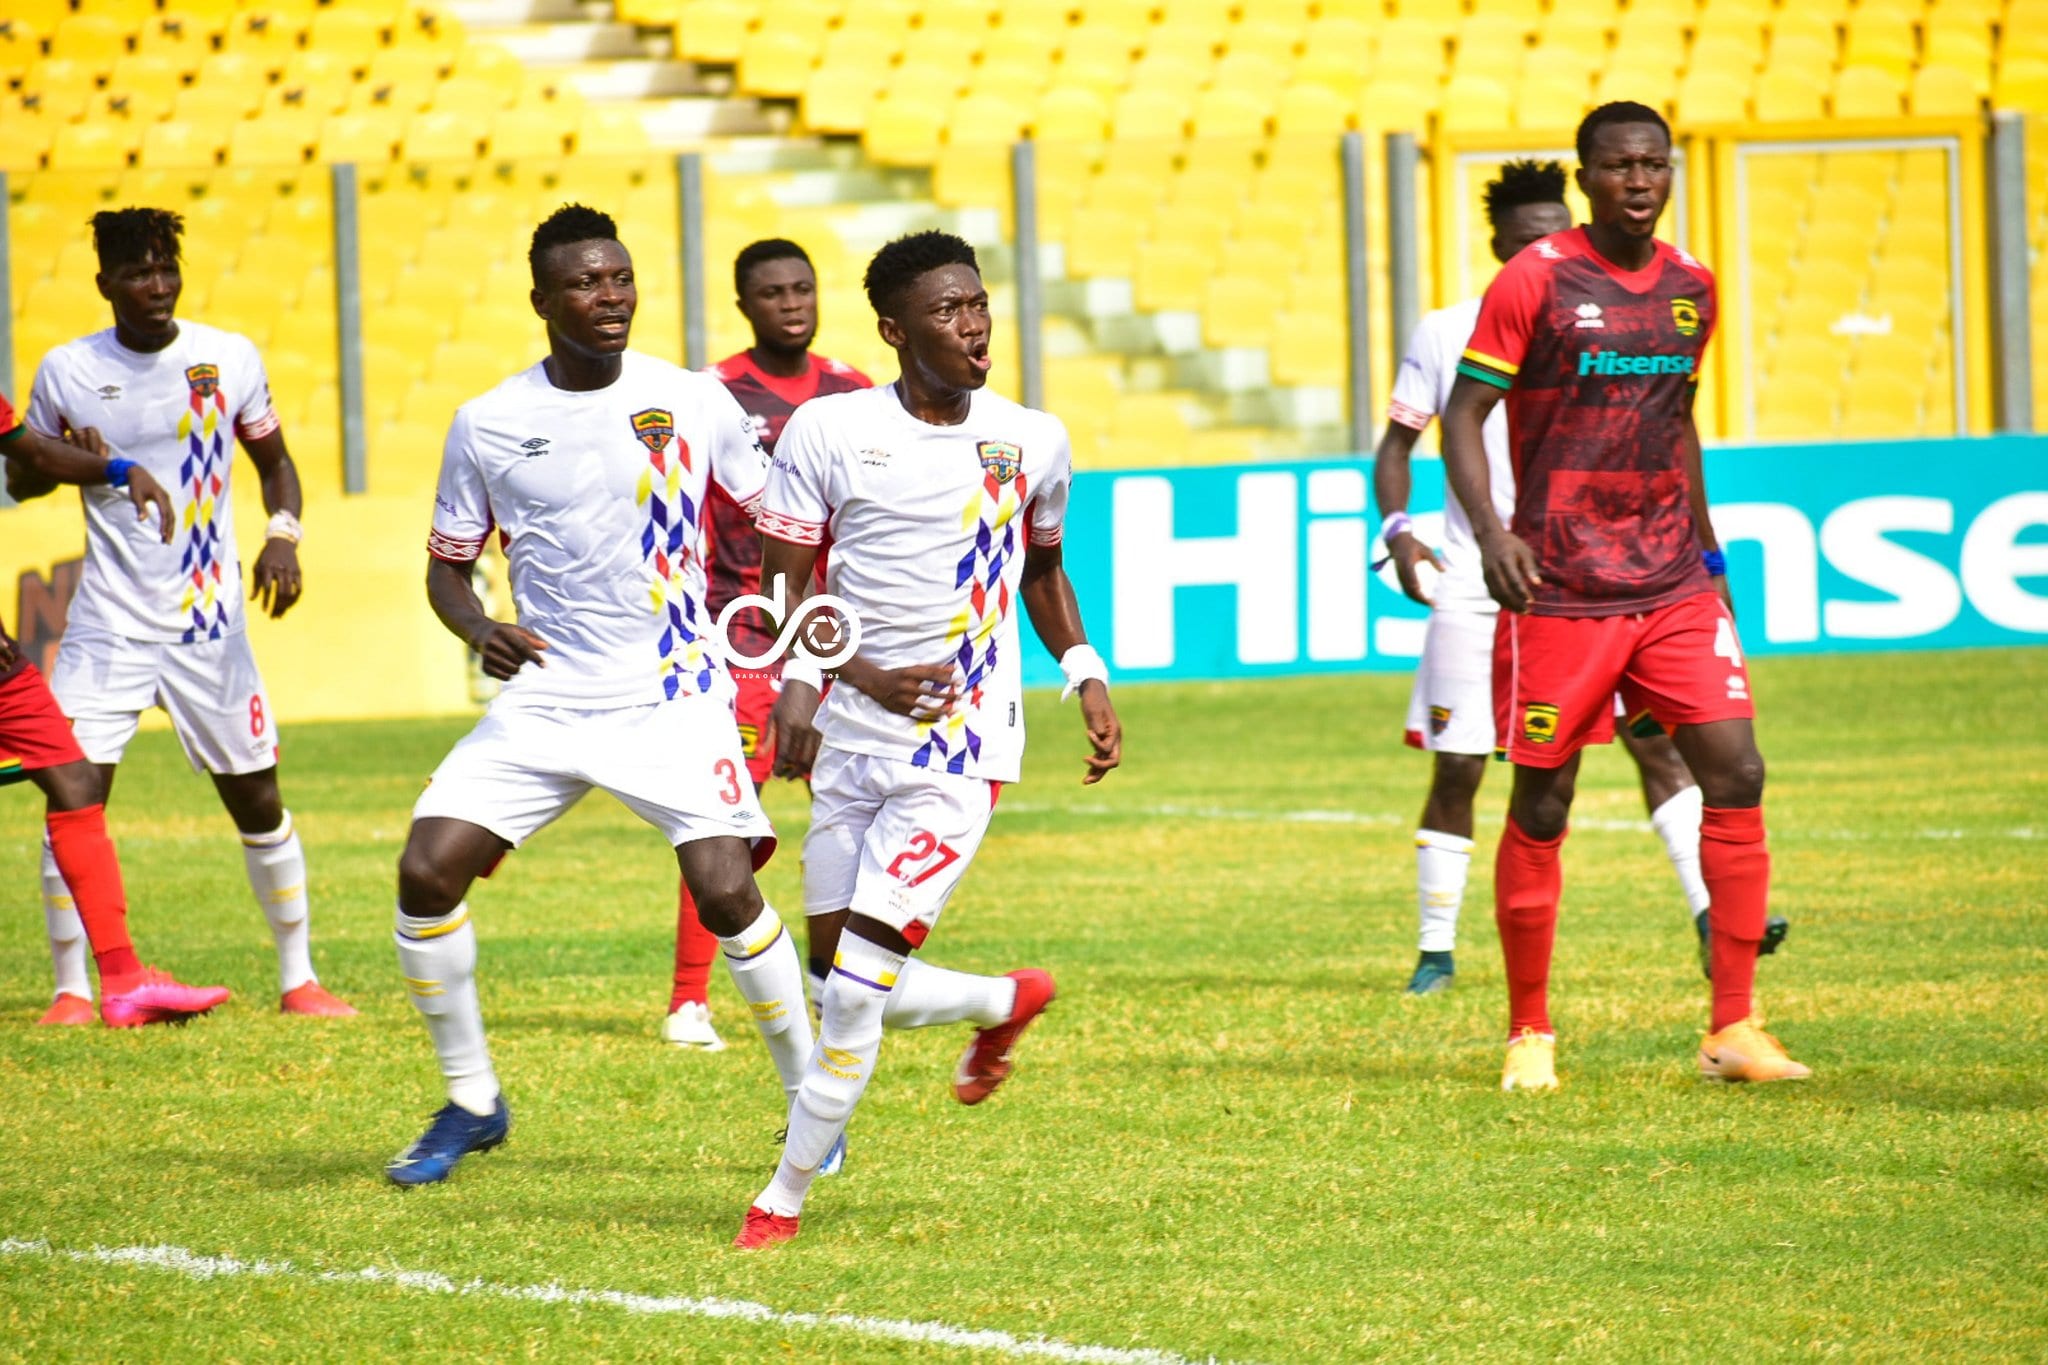 Hearts of Oak PRO Opare Addo urges fans to buy Super Clash tickets early